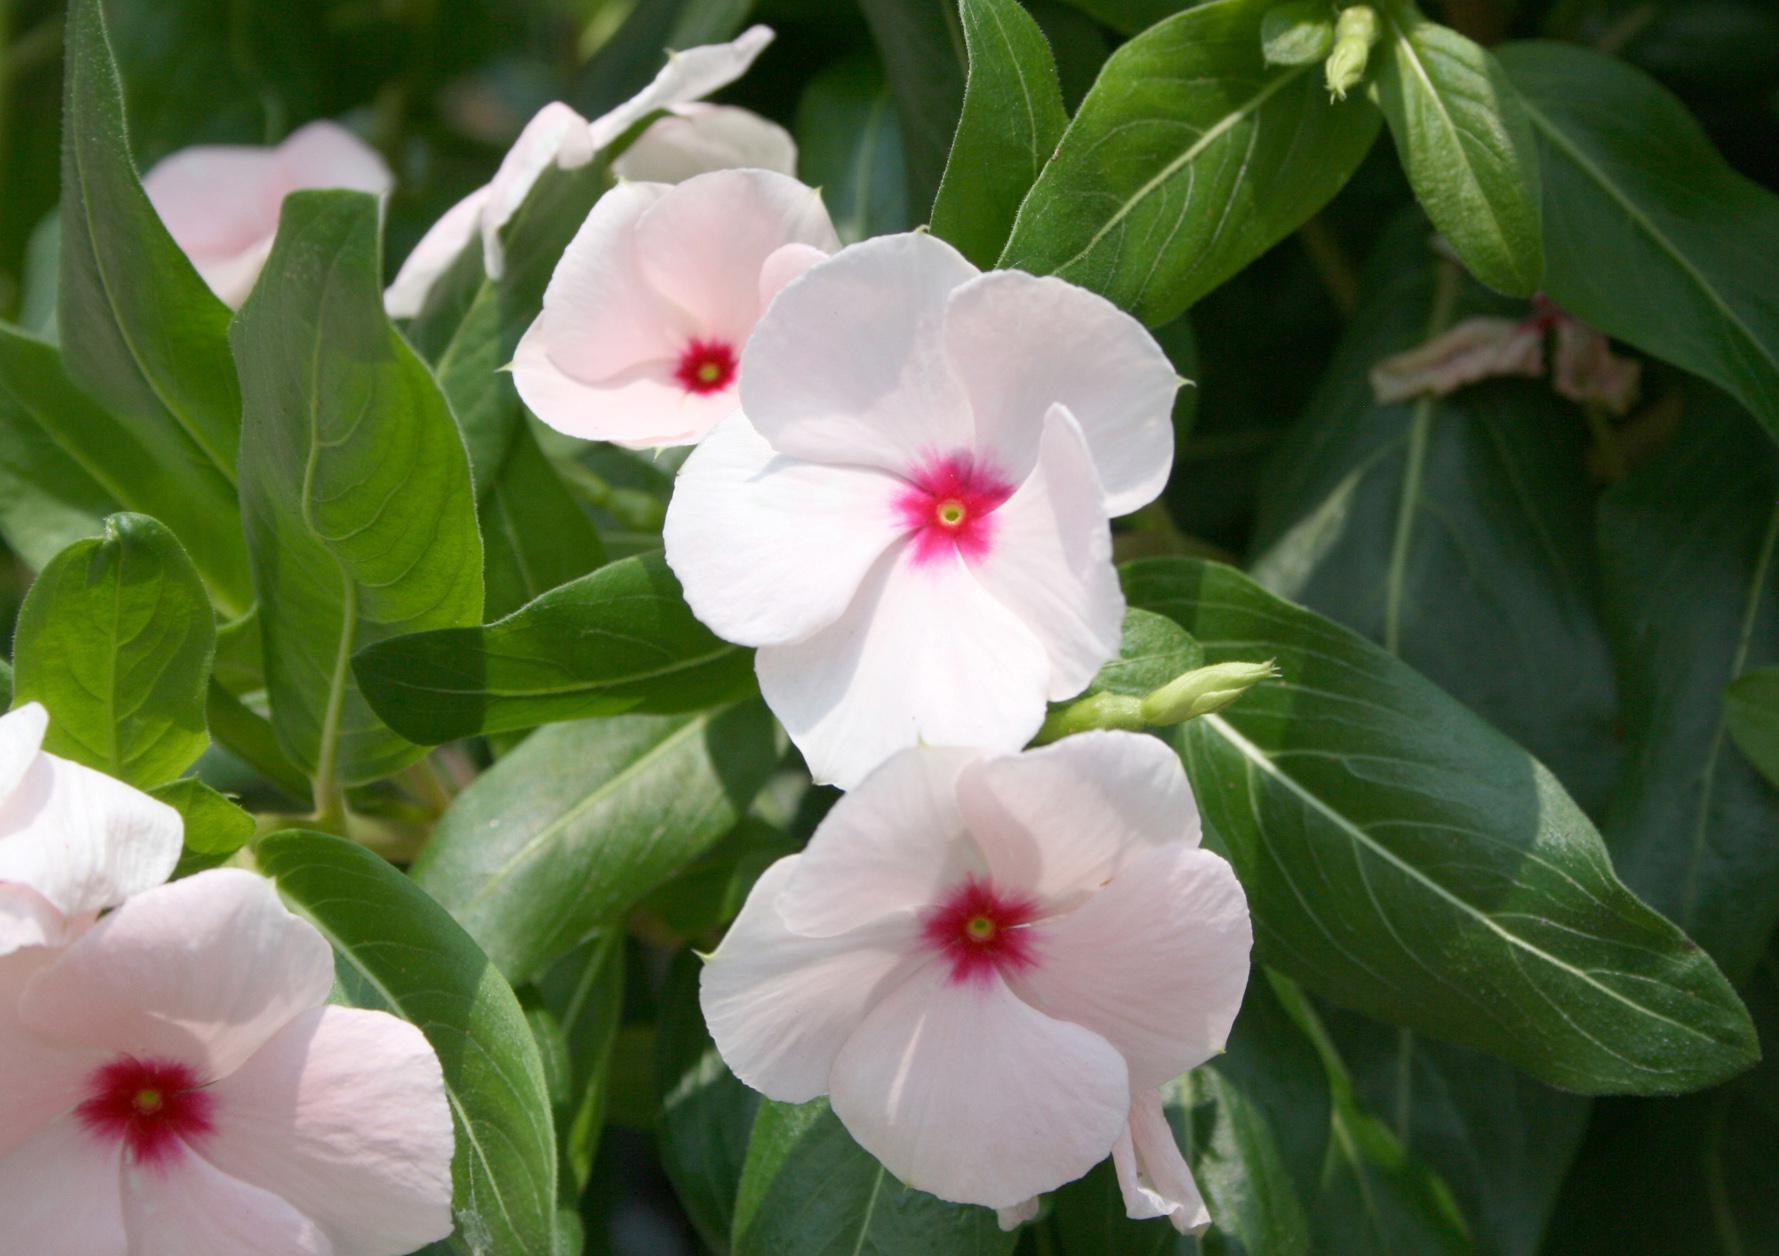 Popular flowering plants, such as this vinca, as well as herbs, vegetables and bedding plants will be available for purchase at the Mississippi State University horticulture club's annual spring plant sale April 5 and 6 in the greenhouses behind Dorman Hall. The sale runs from 9 a.m. to 5:30 p.m. on Friday and 8 a.m. to 1 p.m. on Saturday. (Photo by MSU Ag Communications/Gary Bachman)